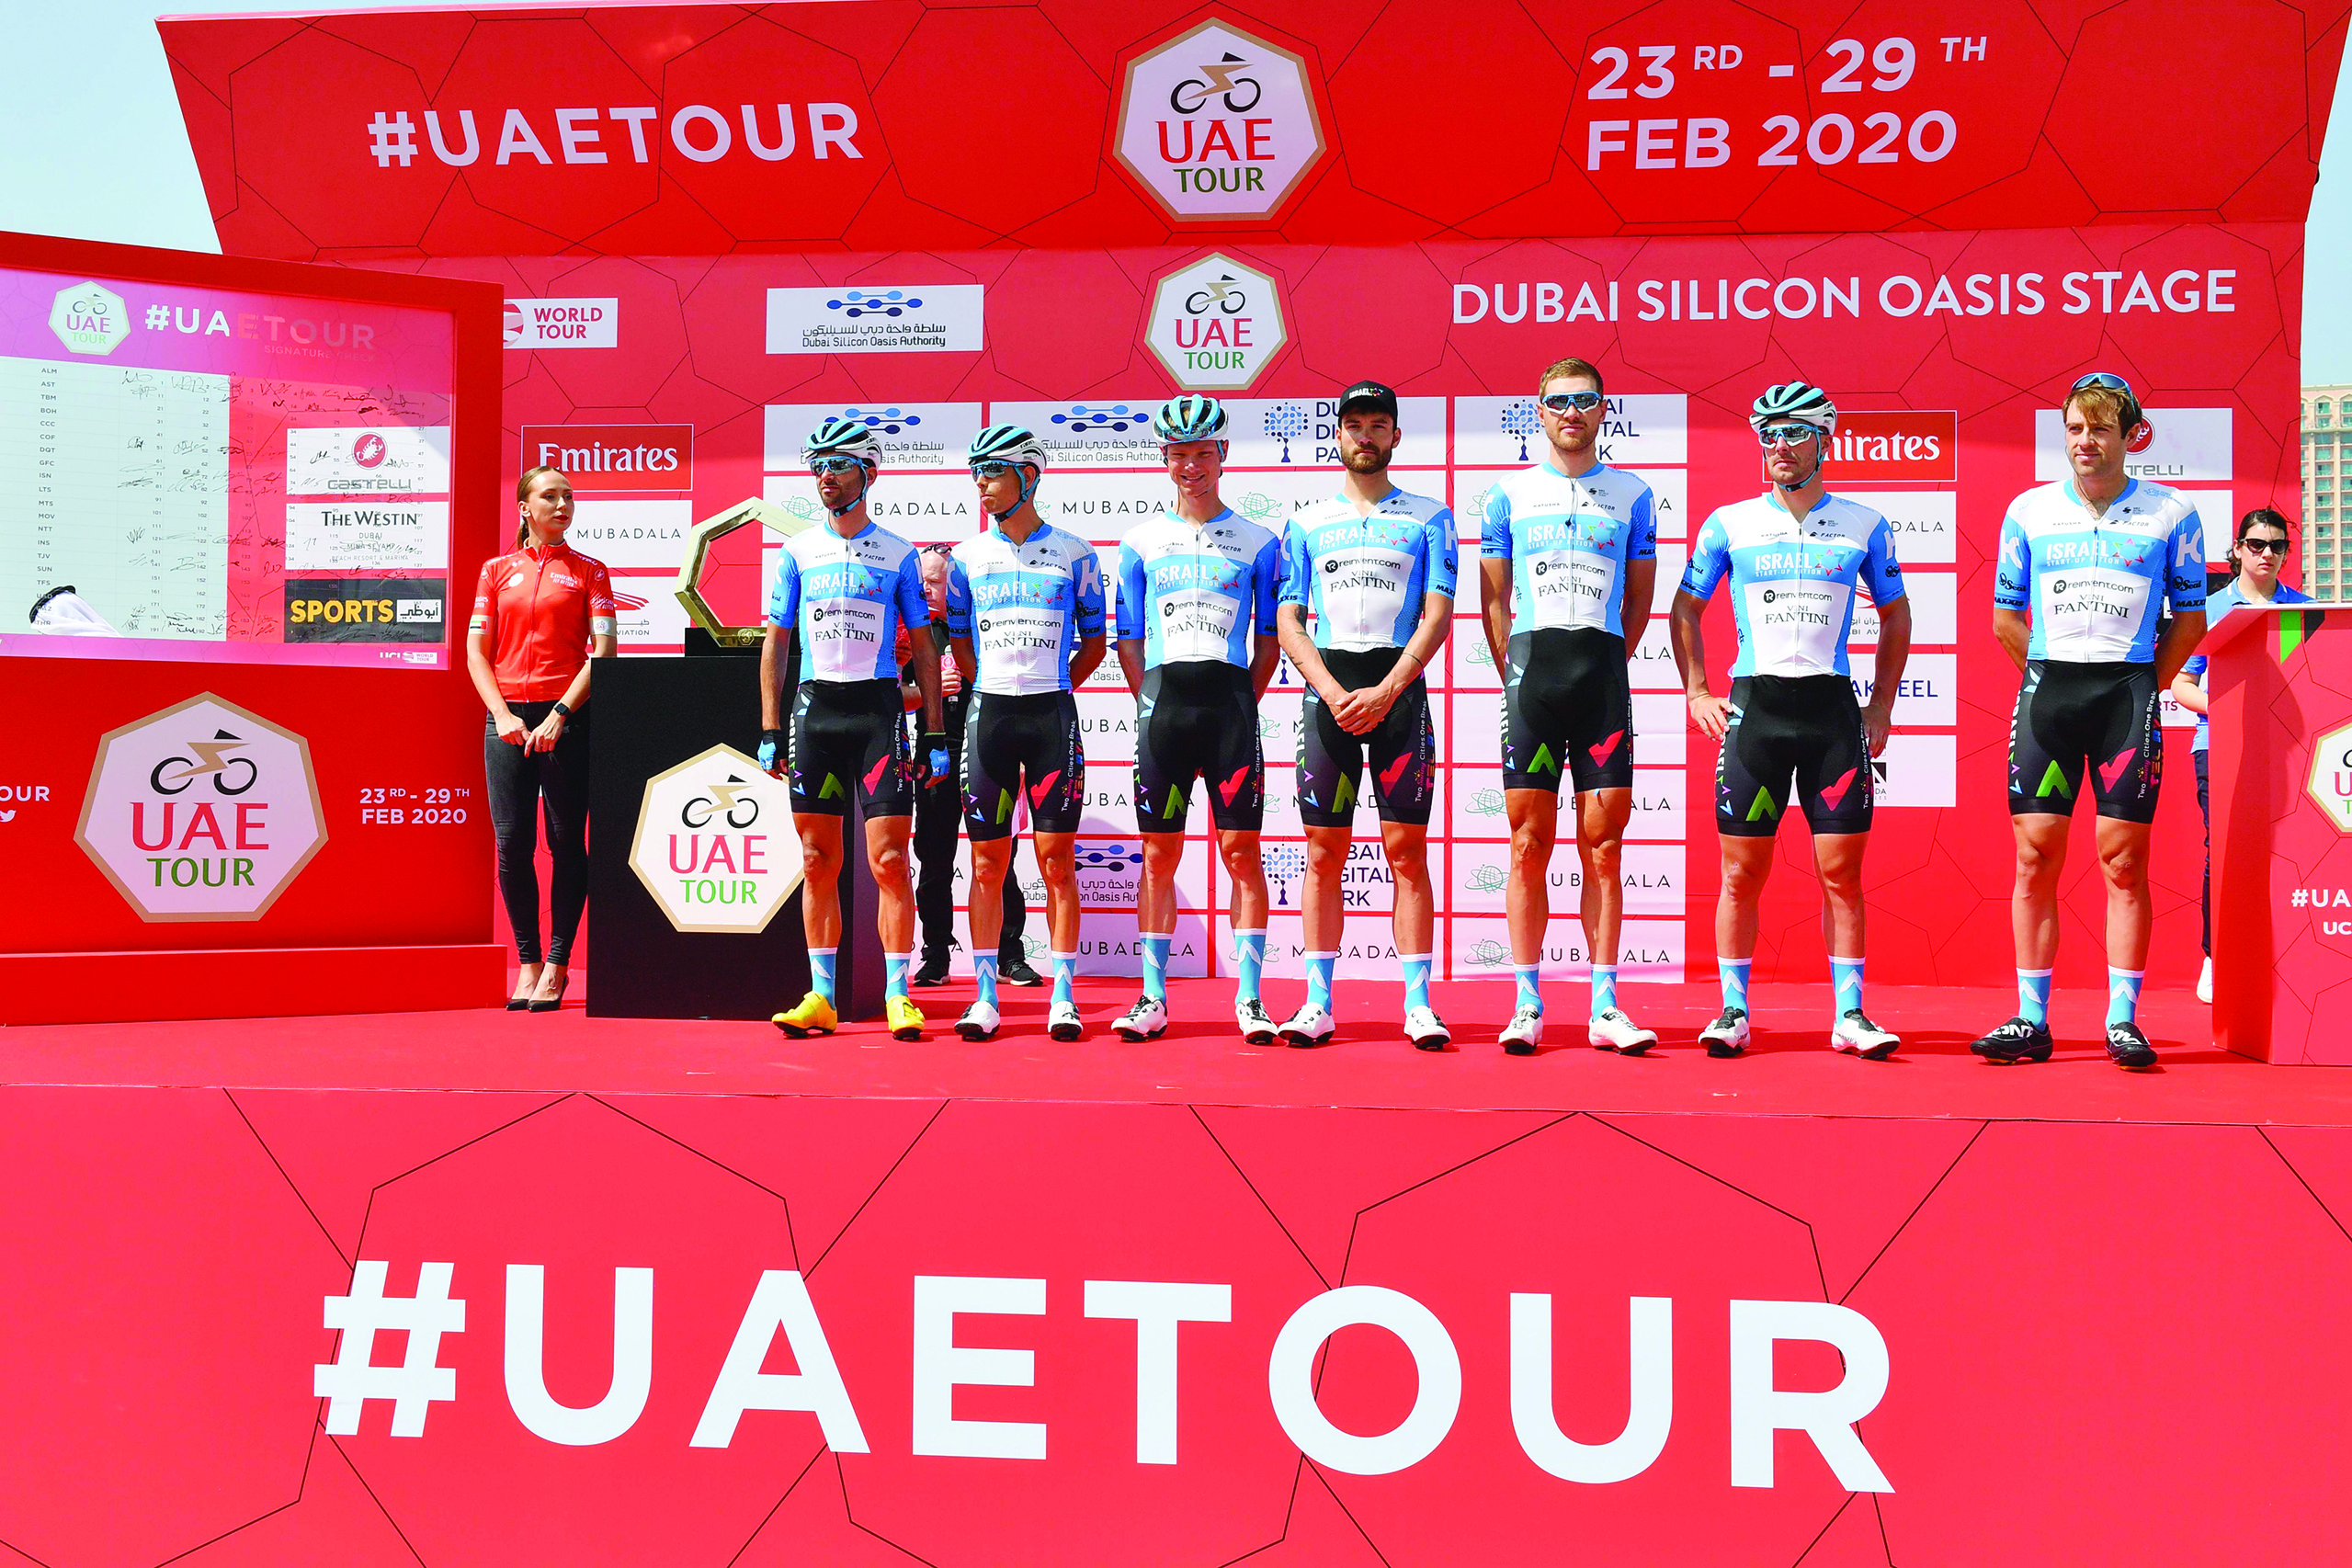 Israel Start-Up Nation team pose before the start of the first stage of the UAE Tour from the Pointe to Silicon Oasis in Dubai on February 23, 2020. (Photo by Giuseppe CACACE / AFP)